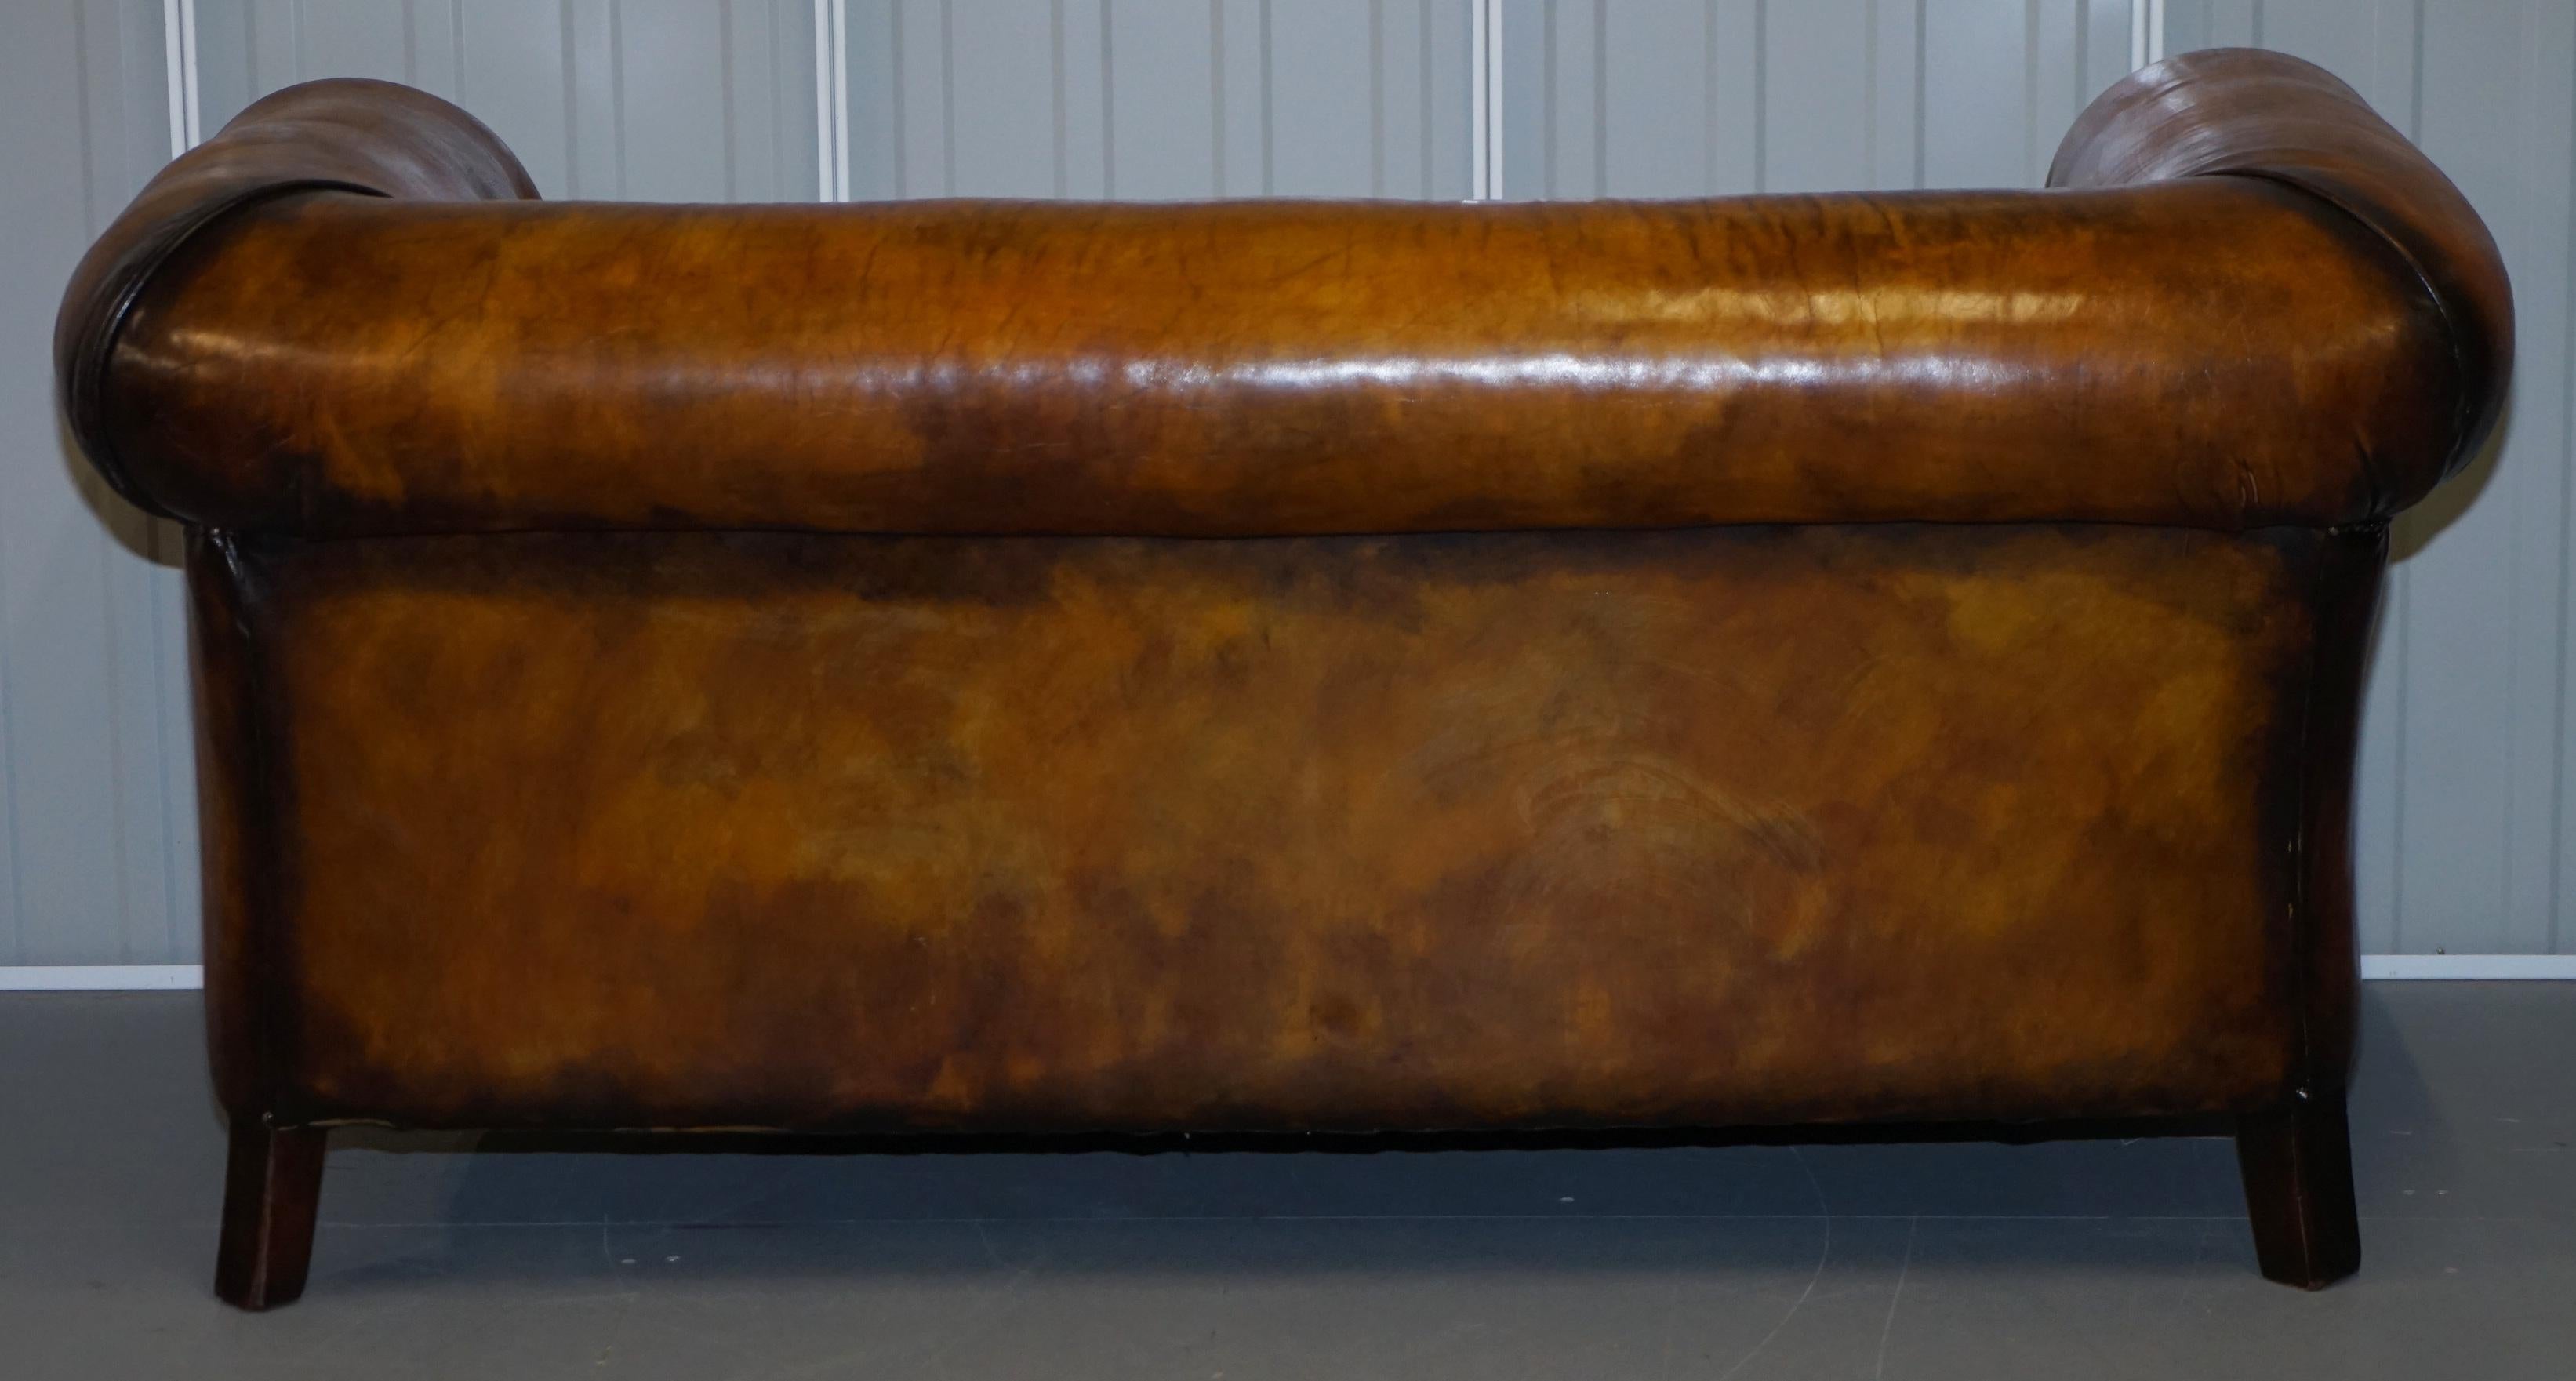 1 of 2 Restored Victorian Gentleman's Club Chesterfield Leather Sofas Kilim Seat For Sale 7